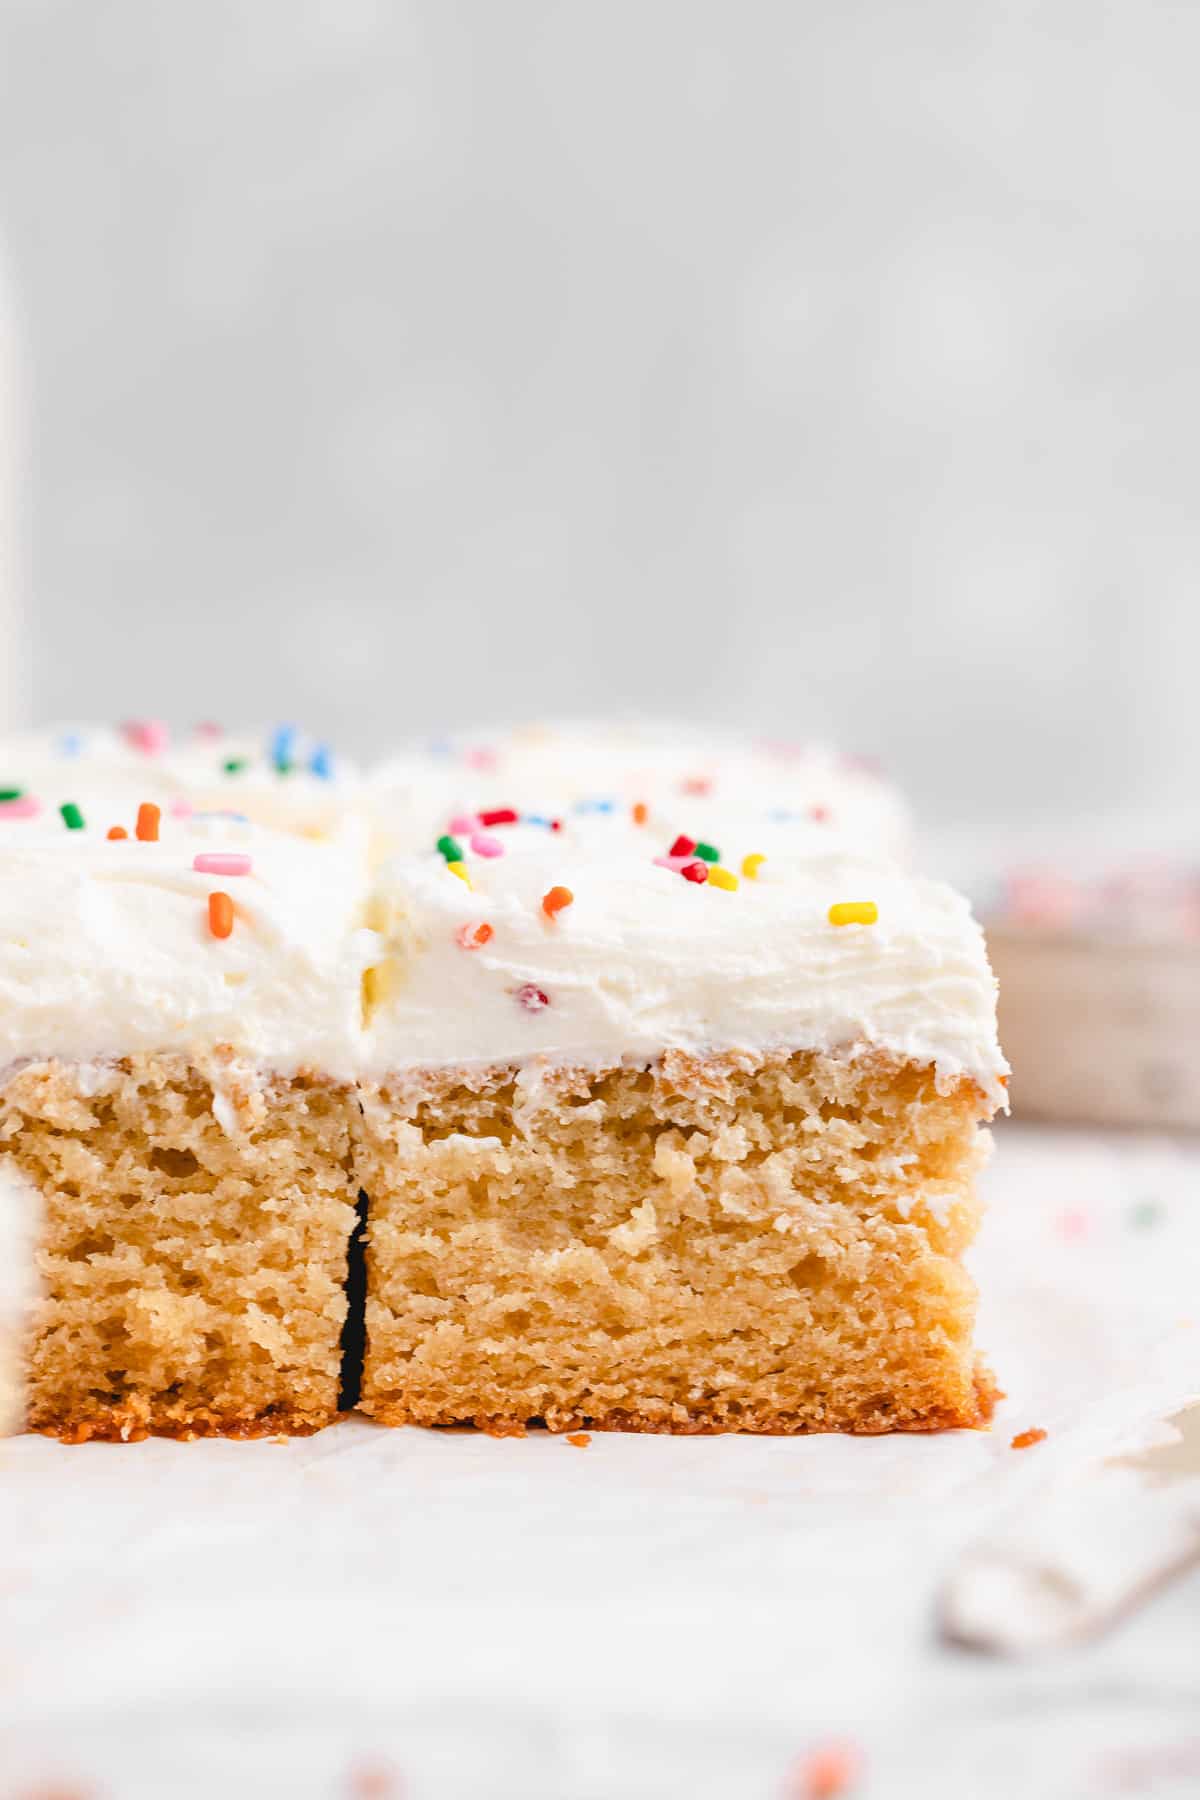 Frosted cake squares with rainbow sprinkles.